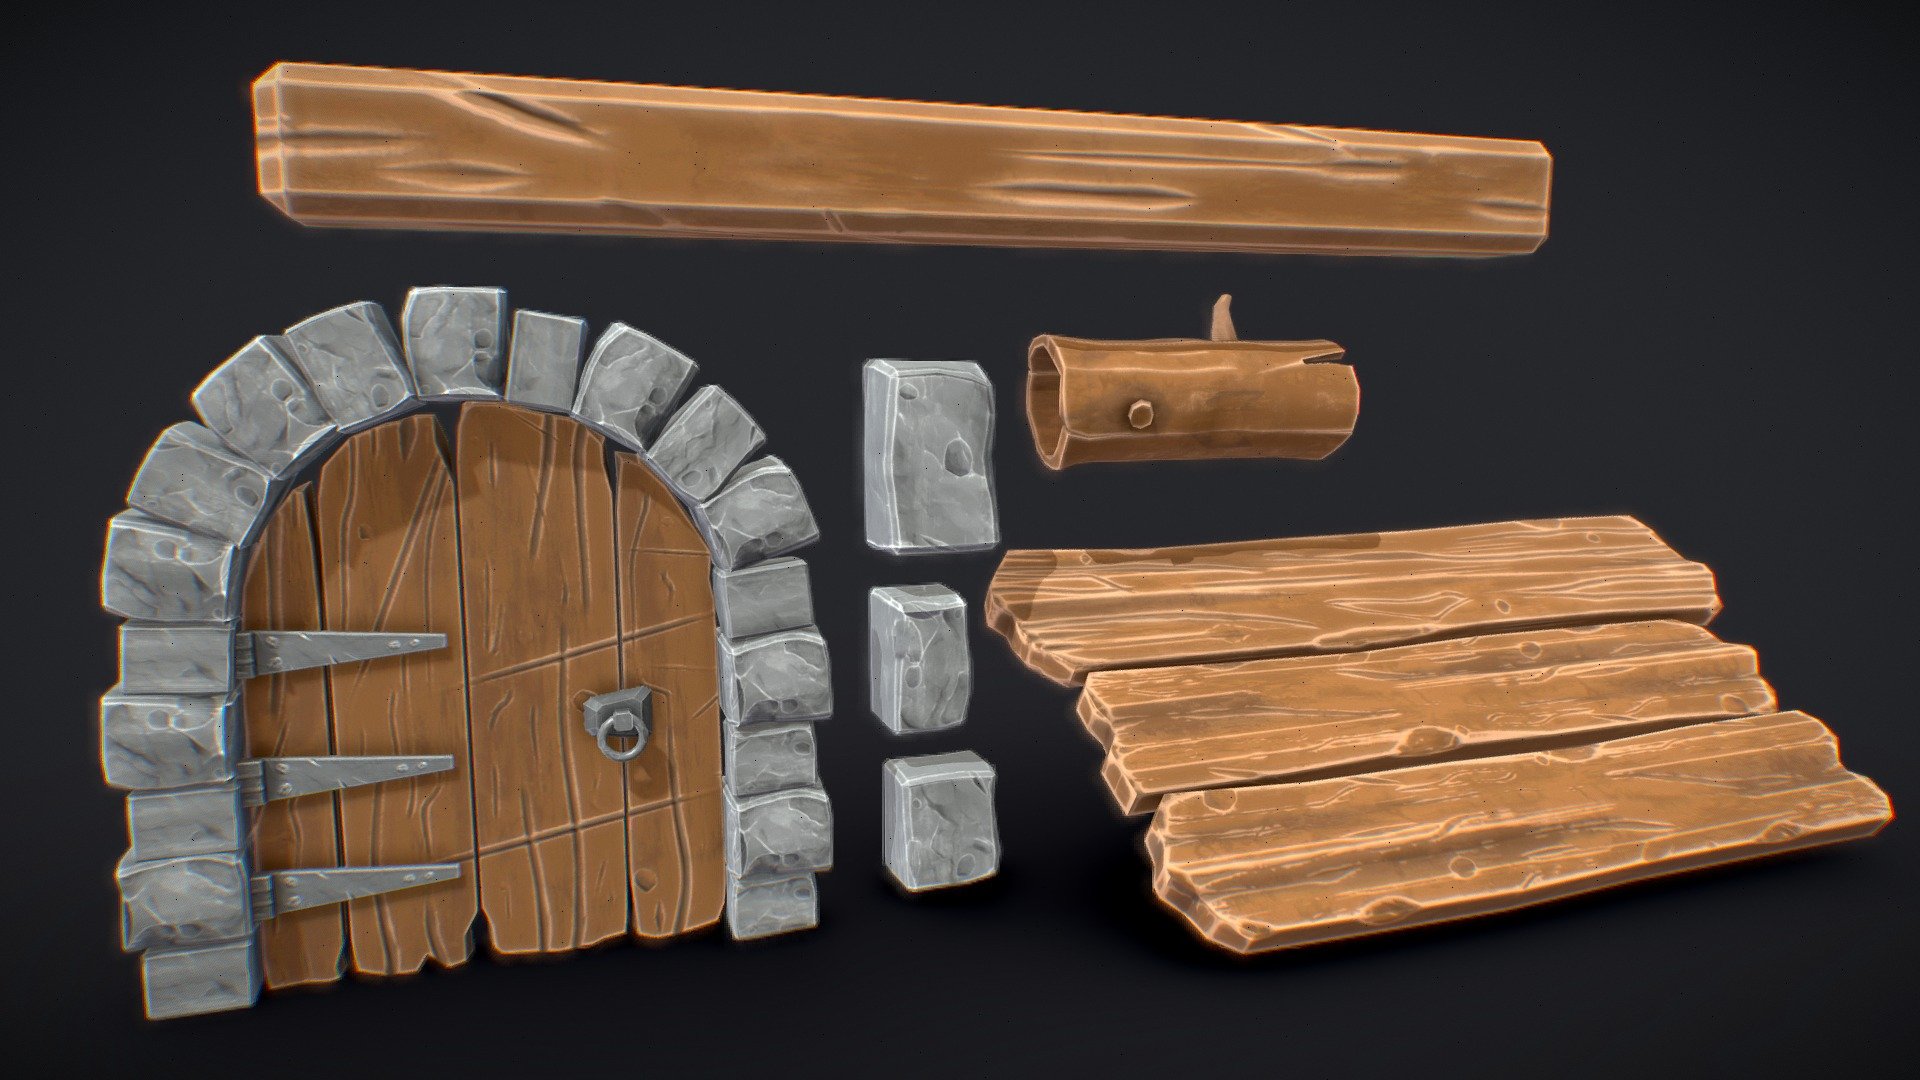 Stylized Game Assets Pack, it is low poly and easily usable in games.

You will get a door, 3 planks, 3 stones, 1 tree trunk and 1 wooden beam.

Sculpted in Zbrush, baked and textured in Substance Painter 3d model